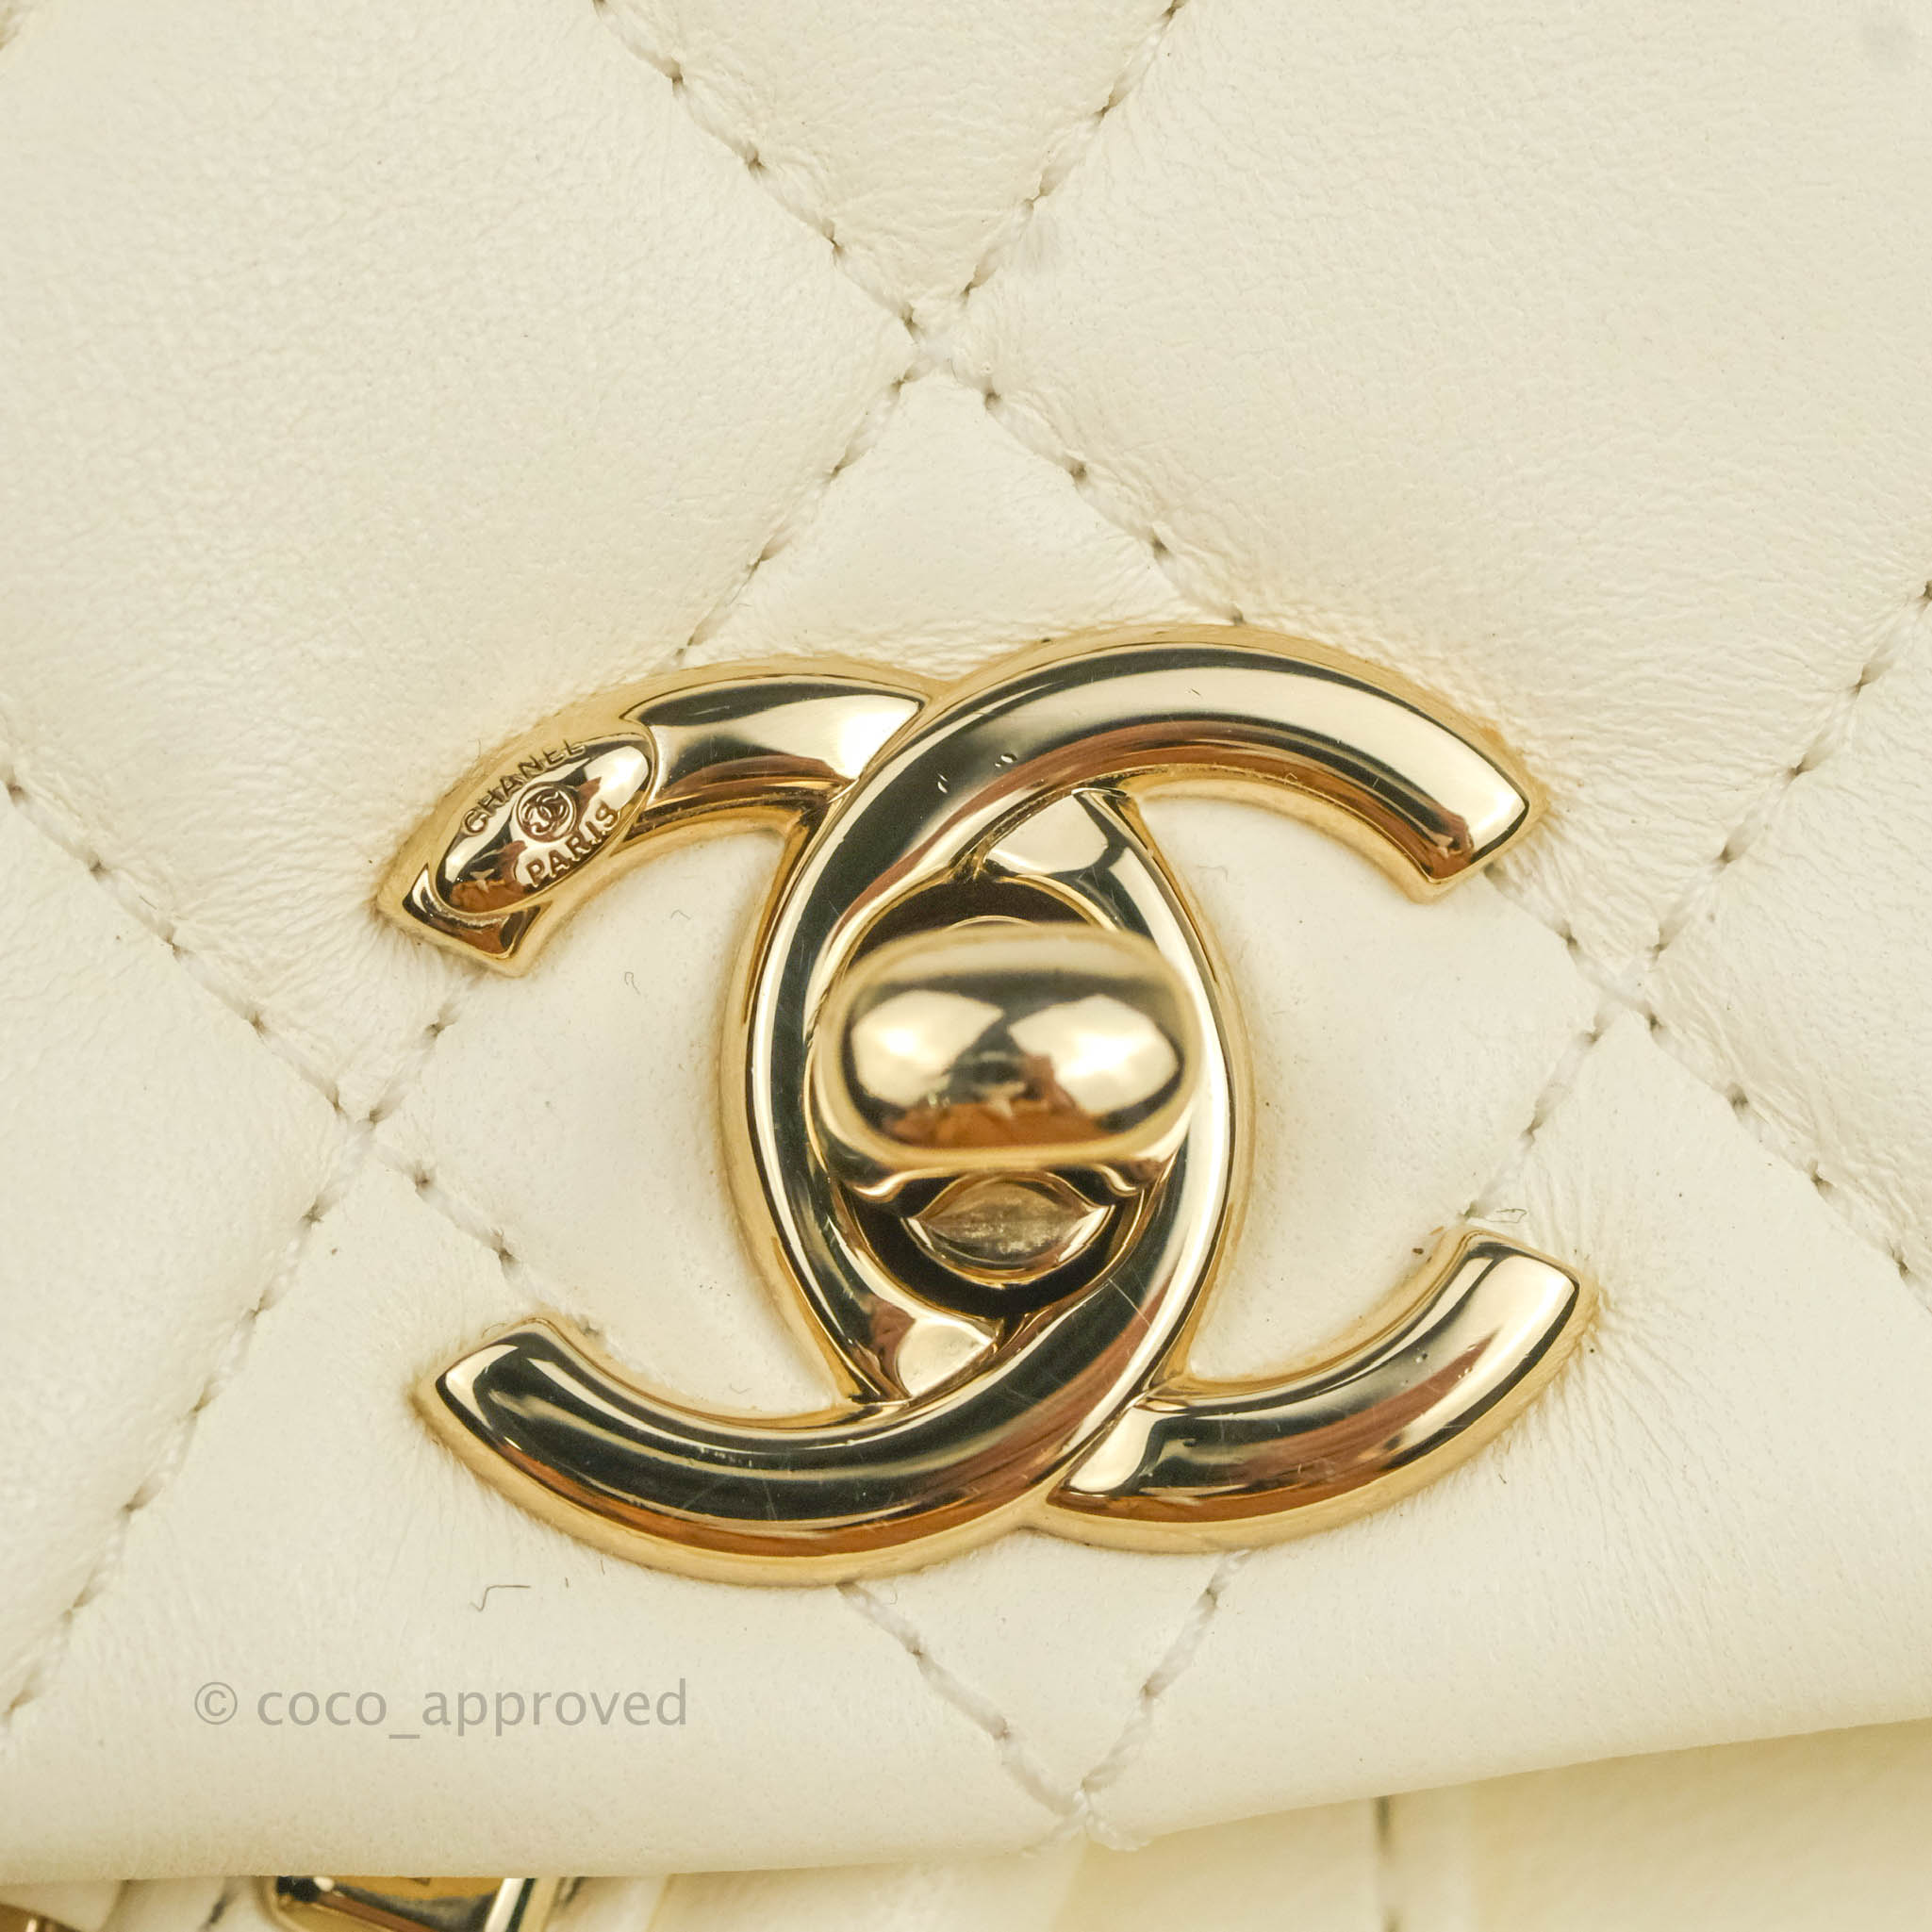 Chanel Vintage Silver Quilted Lambskin Medium Timeless CC Duma Backpack Gold Hardware, 1991-1994